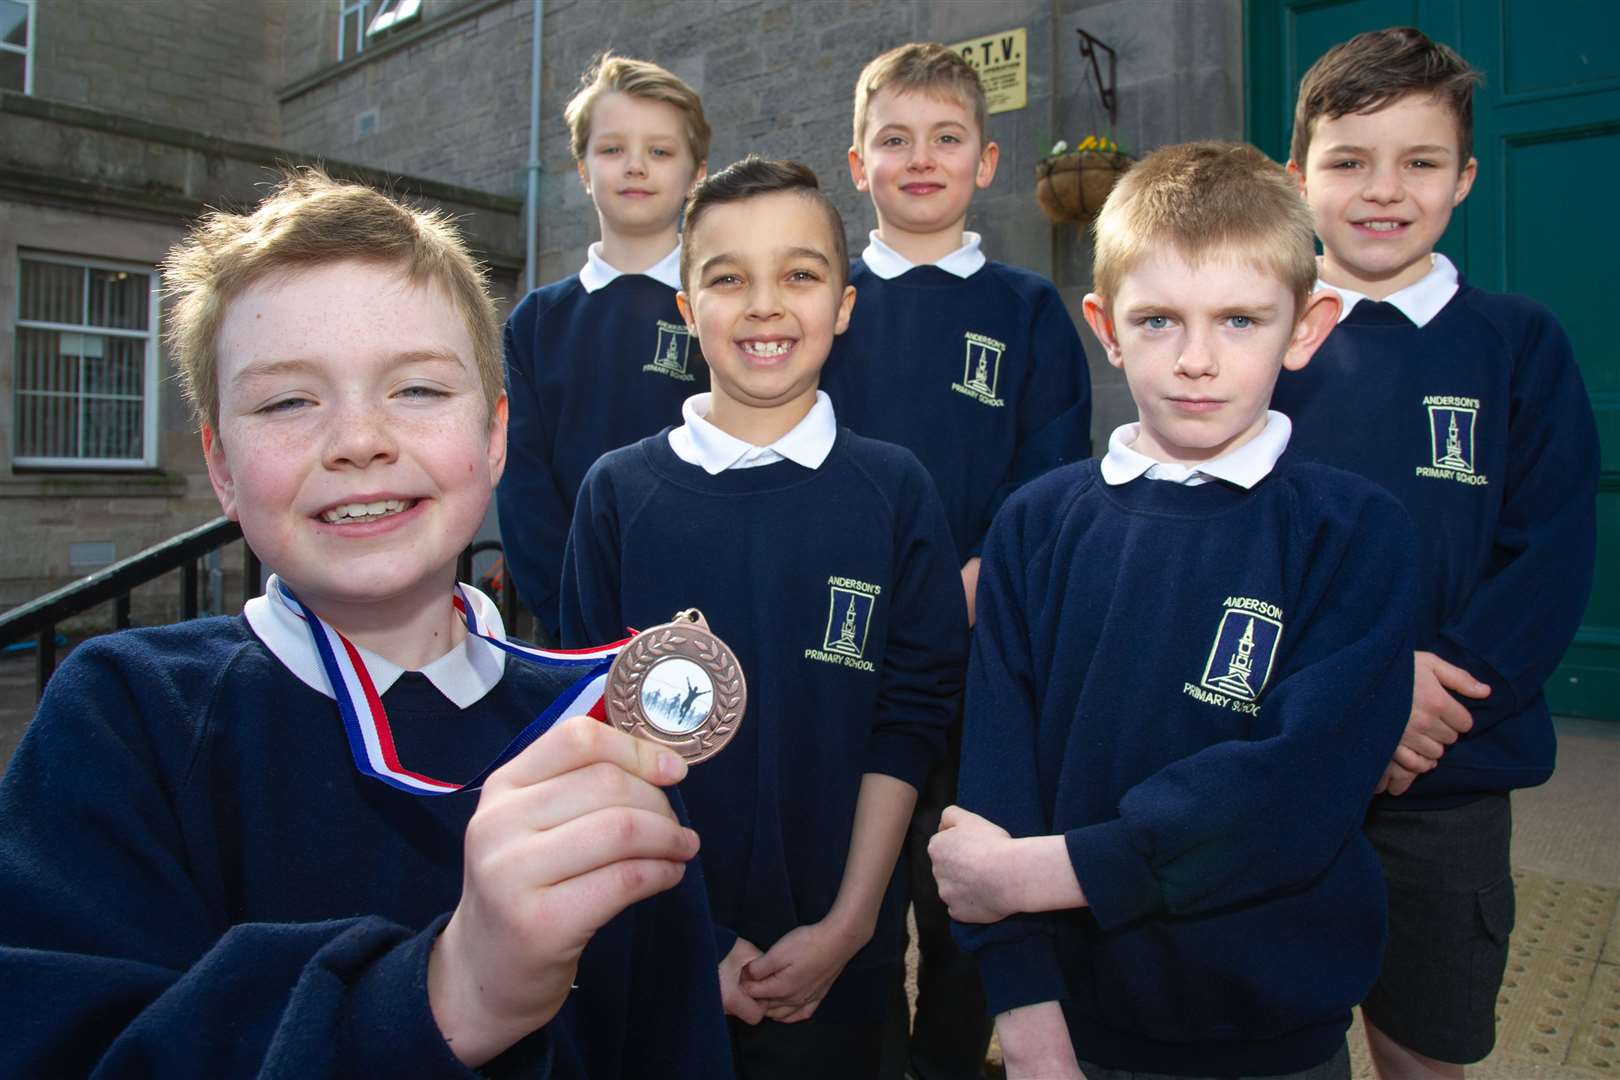 Anderson's P4/5 Boys came 3rd in the Moray Schools Cross Country event.